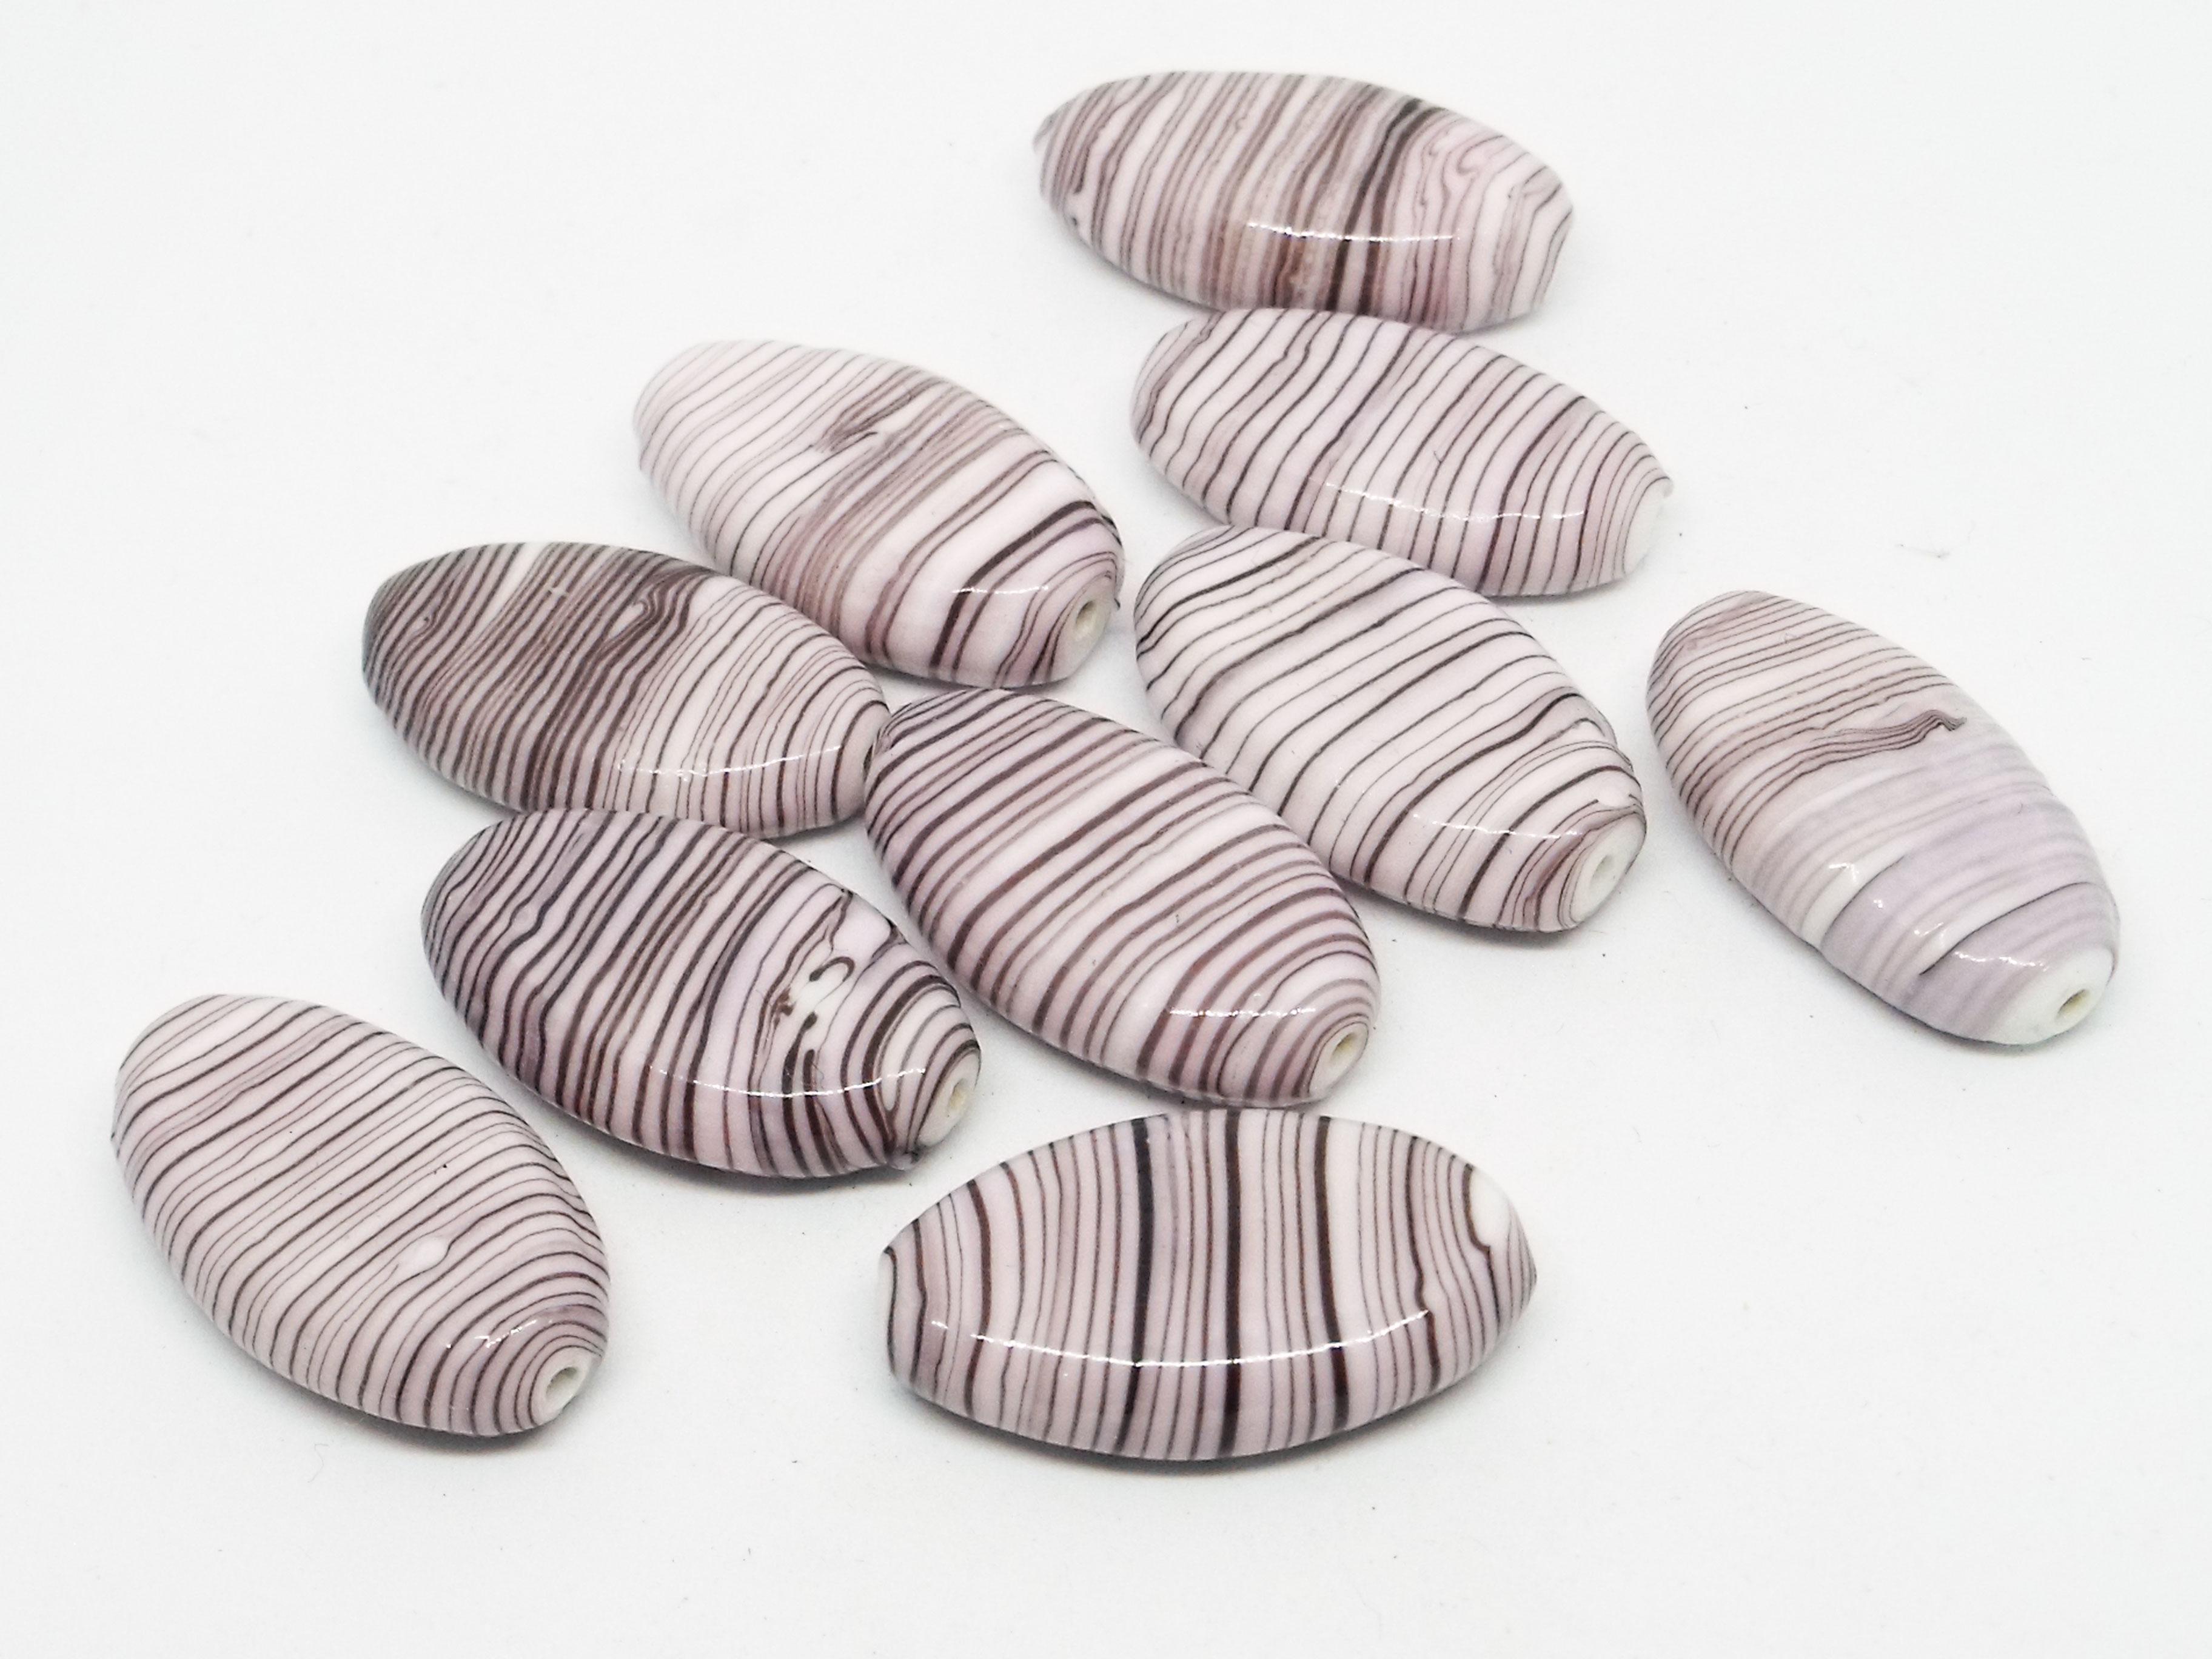 28x18mm Tapered Flat Oval Glass Bead - White Base with Purple and Black Stripes